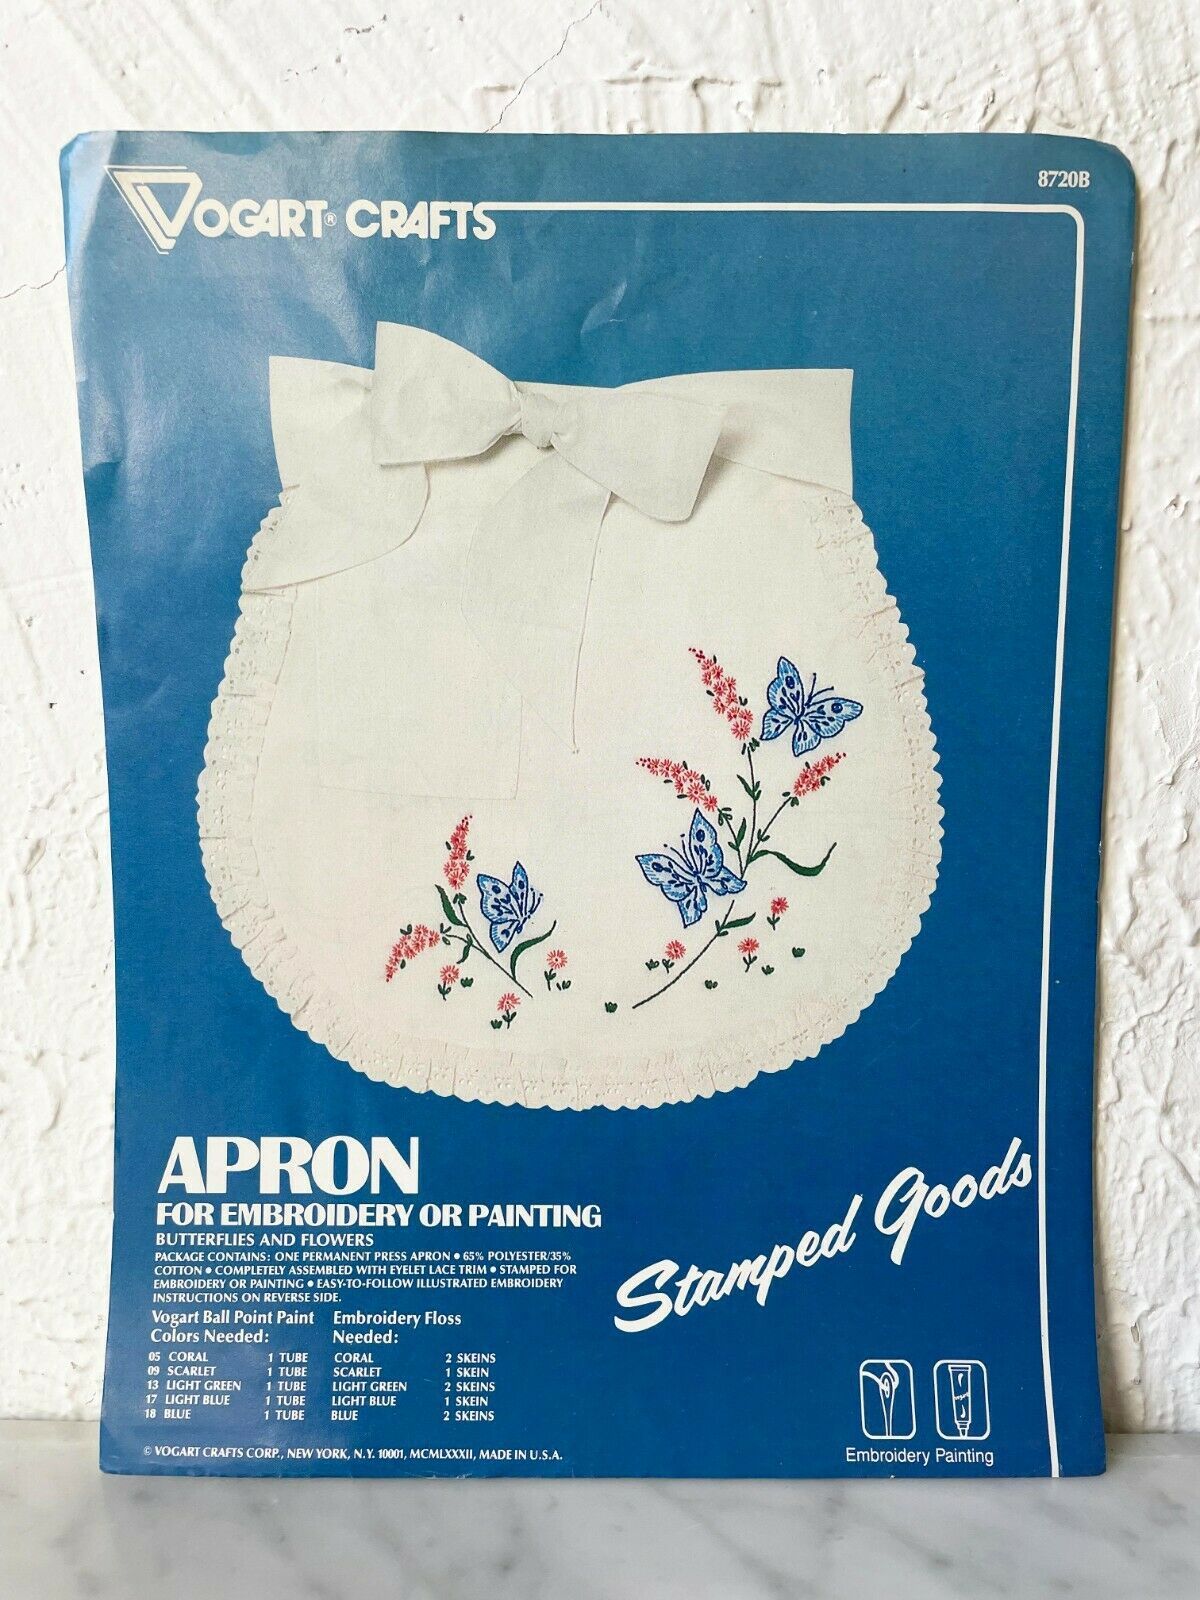 Vintage Vogart Crafts Butterflies & Flowers Apron Embroidery or Painting Kit - $9.45